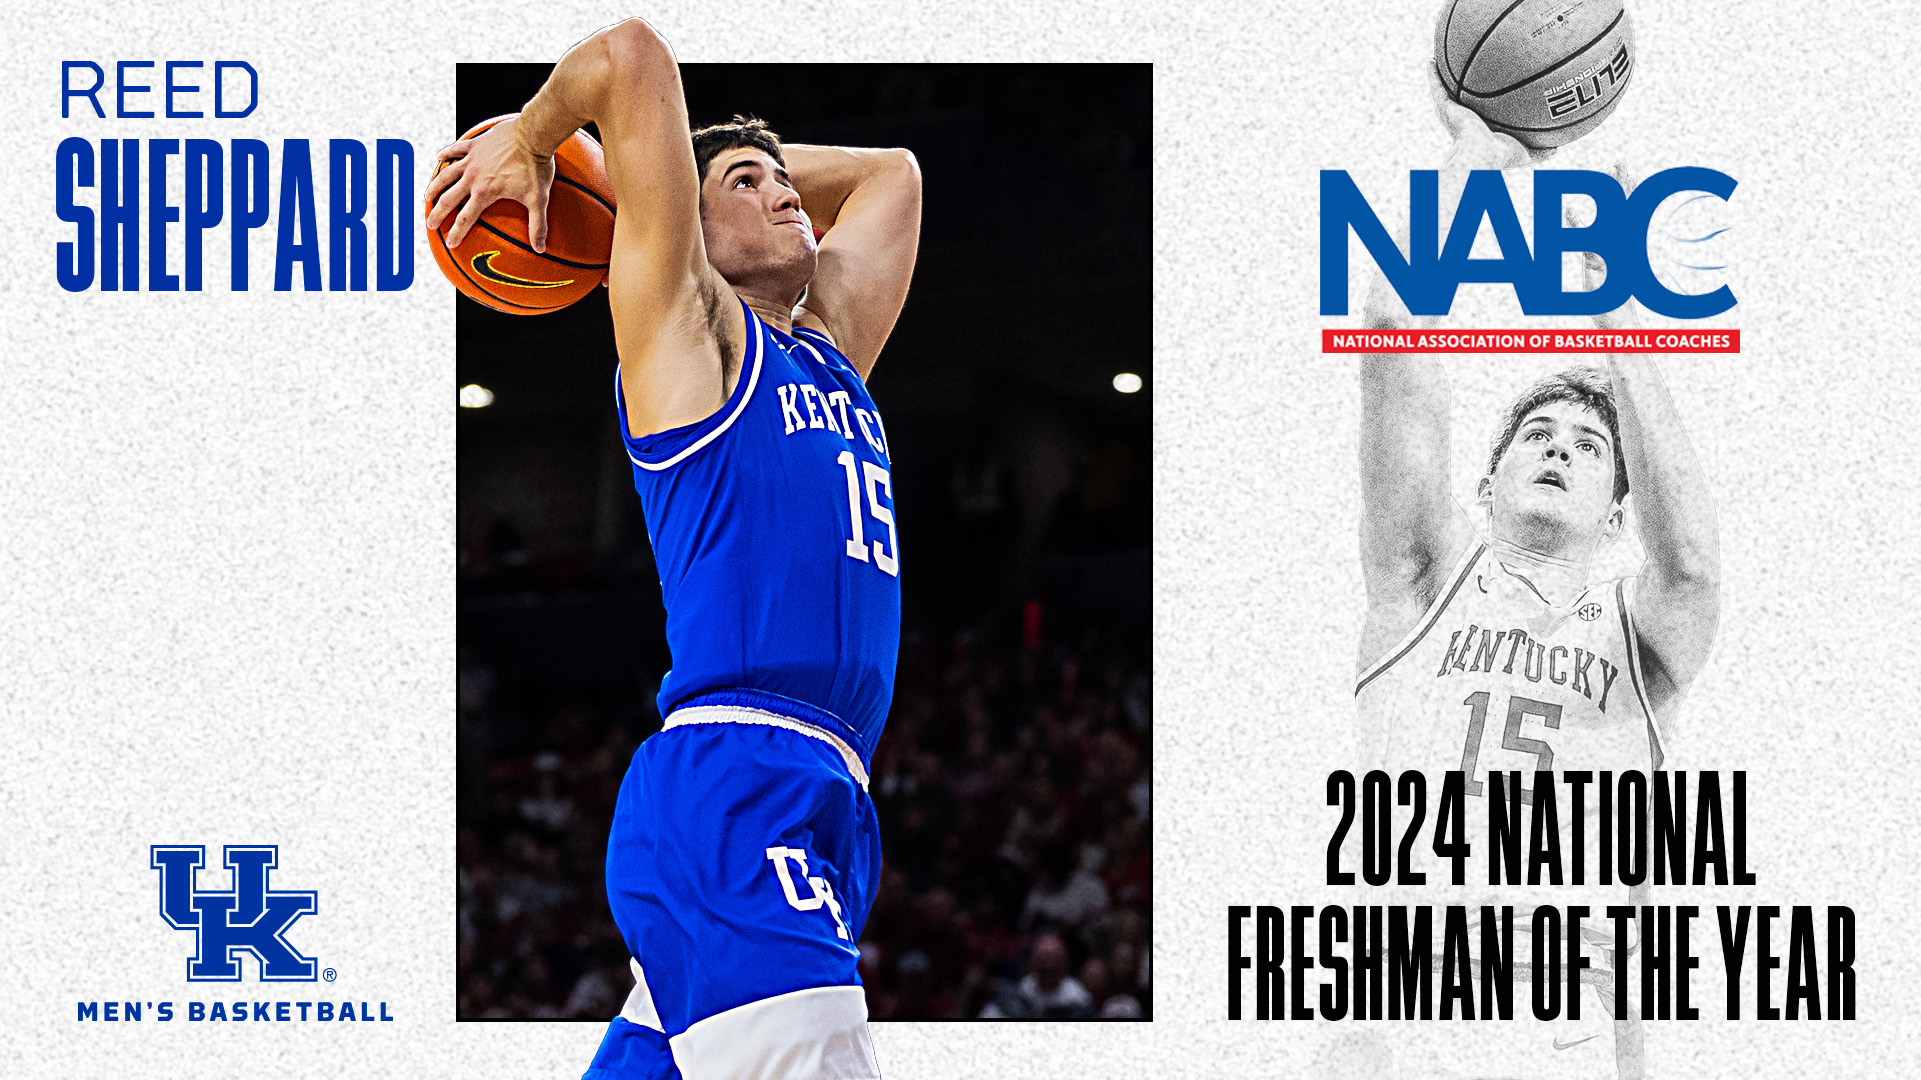 Reed Sheppard Tabbed NABC National Freshman of the Year